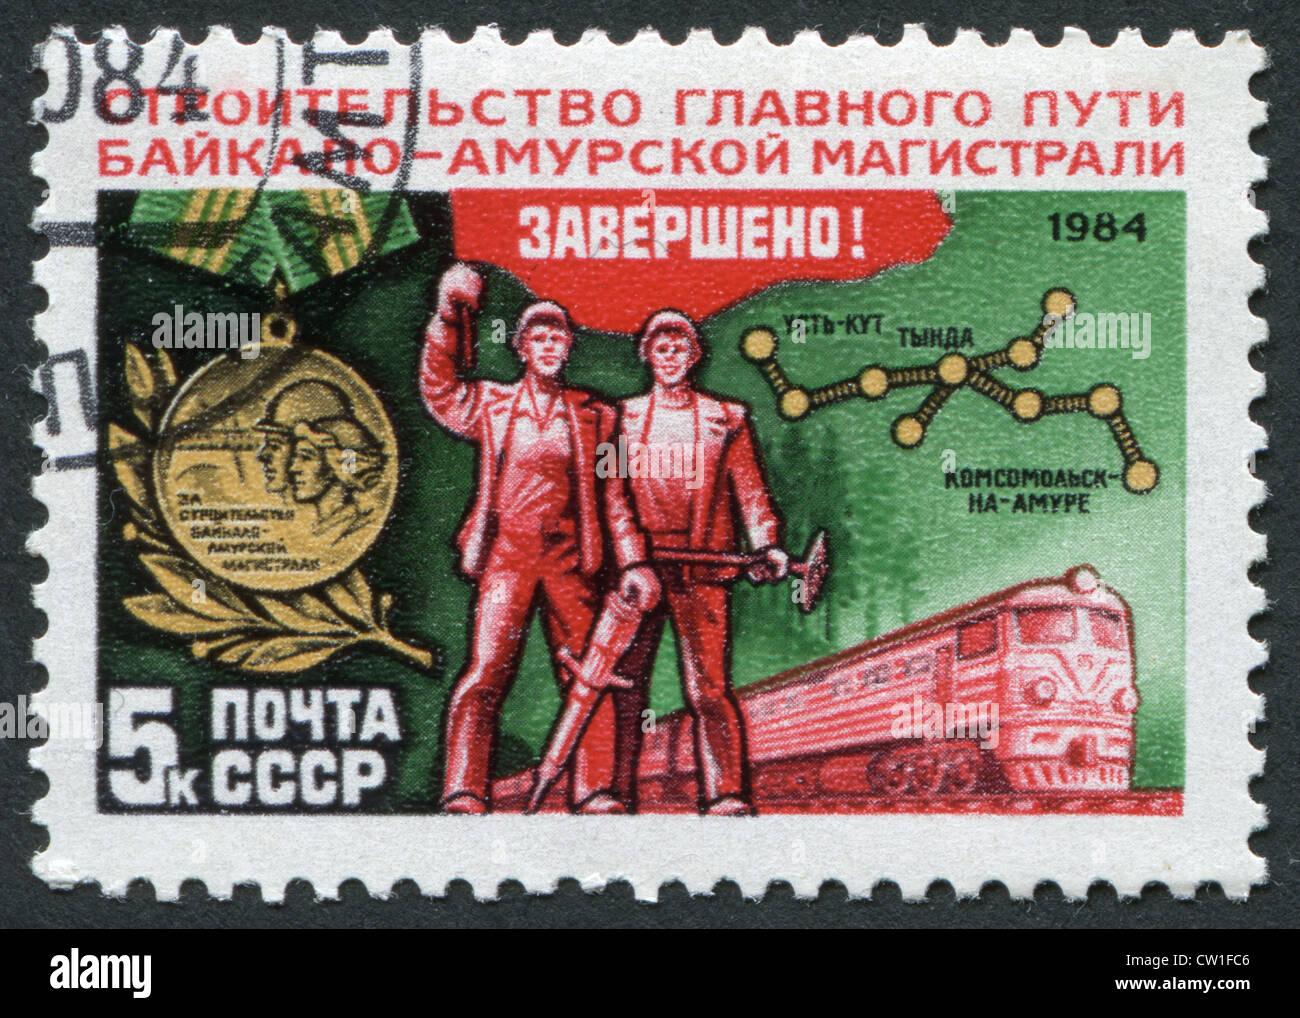 USSR - CIRCA 1984: Postage stamps printed in the USSR, shows the construction of the Baikal-Amur railway, circa 1984 Stock Photo